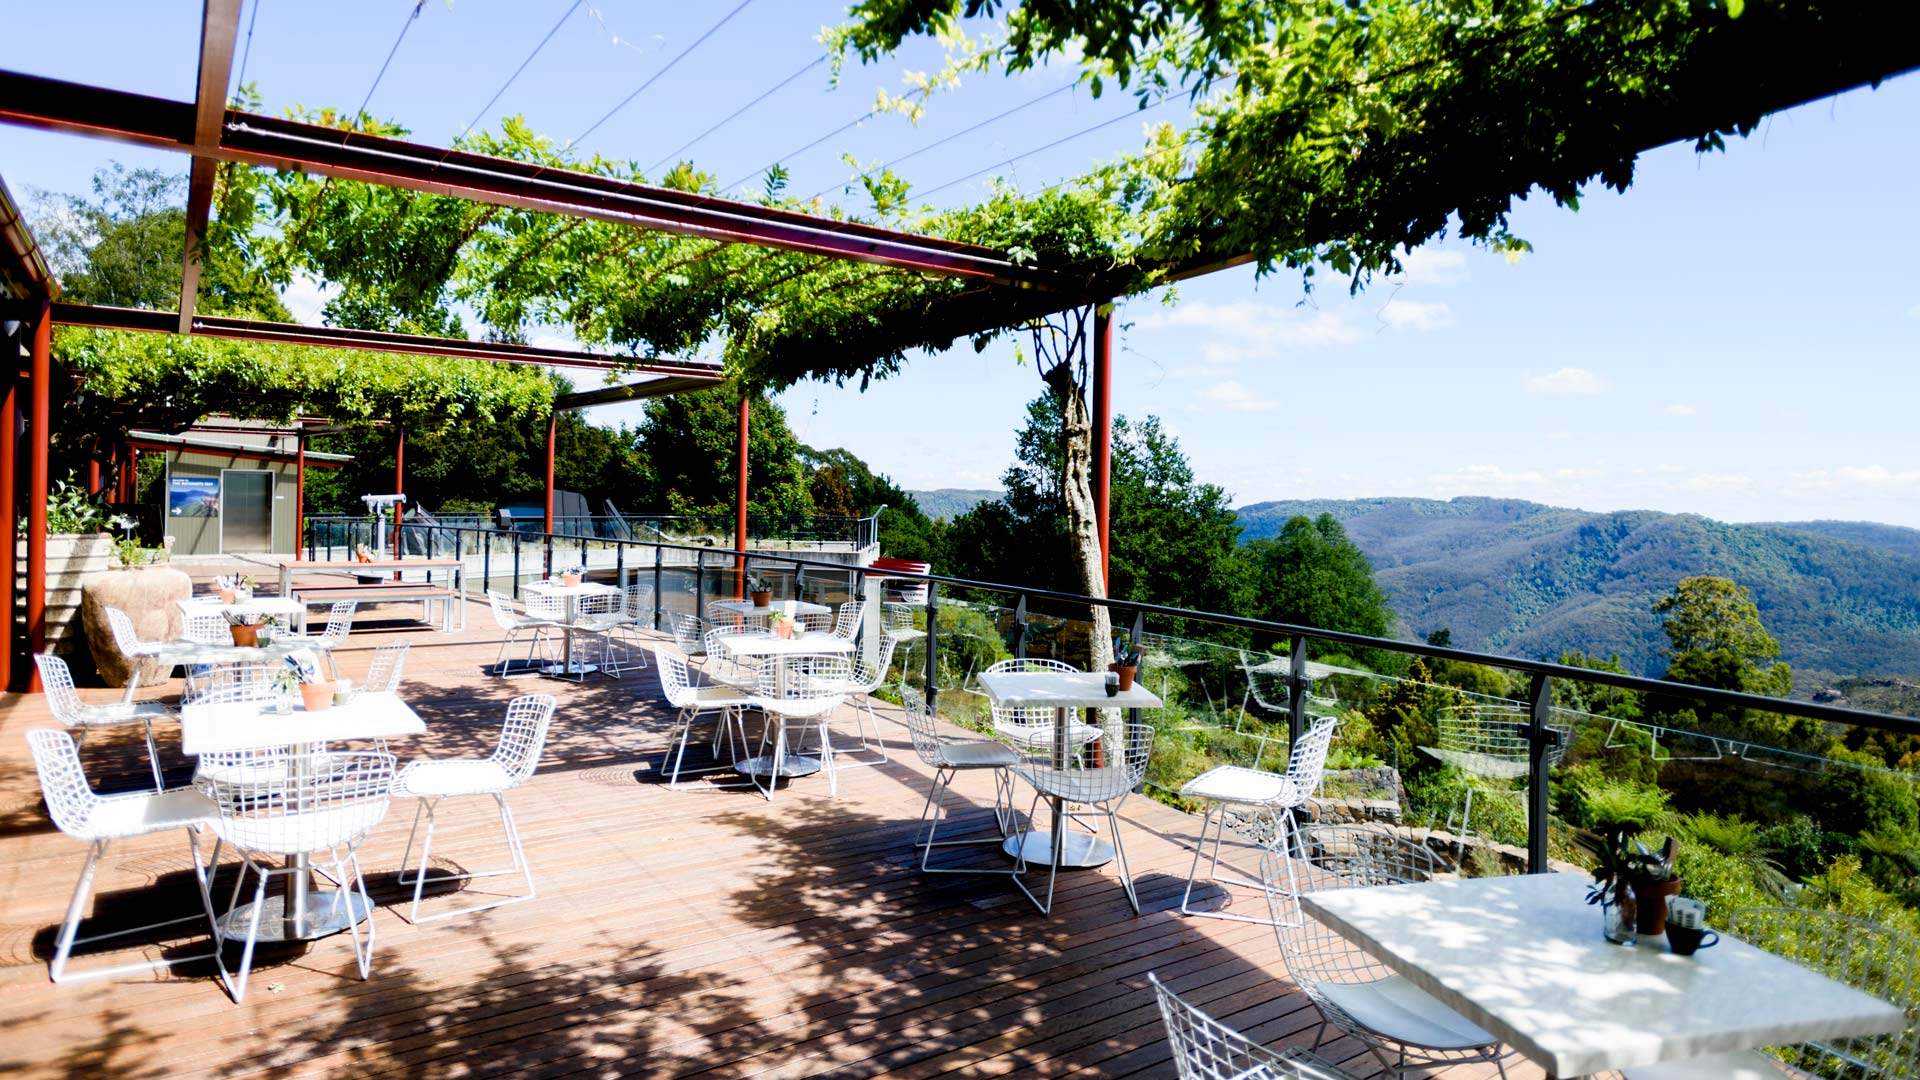 The Best Cafes to Visit in the Blue Mountains